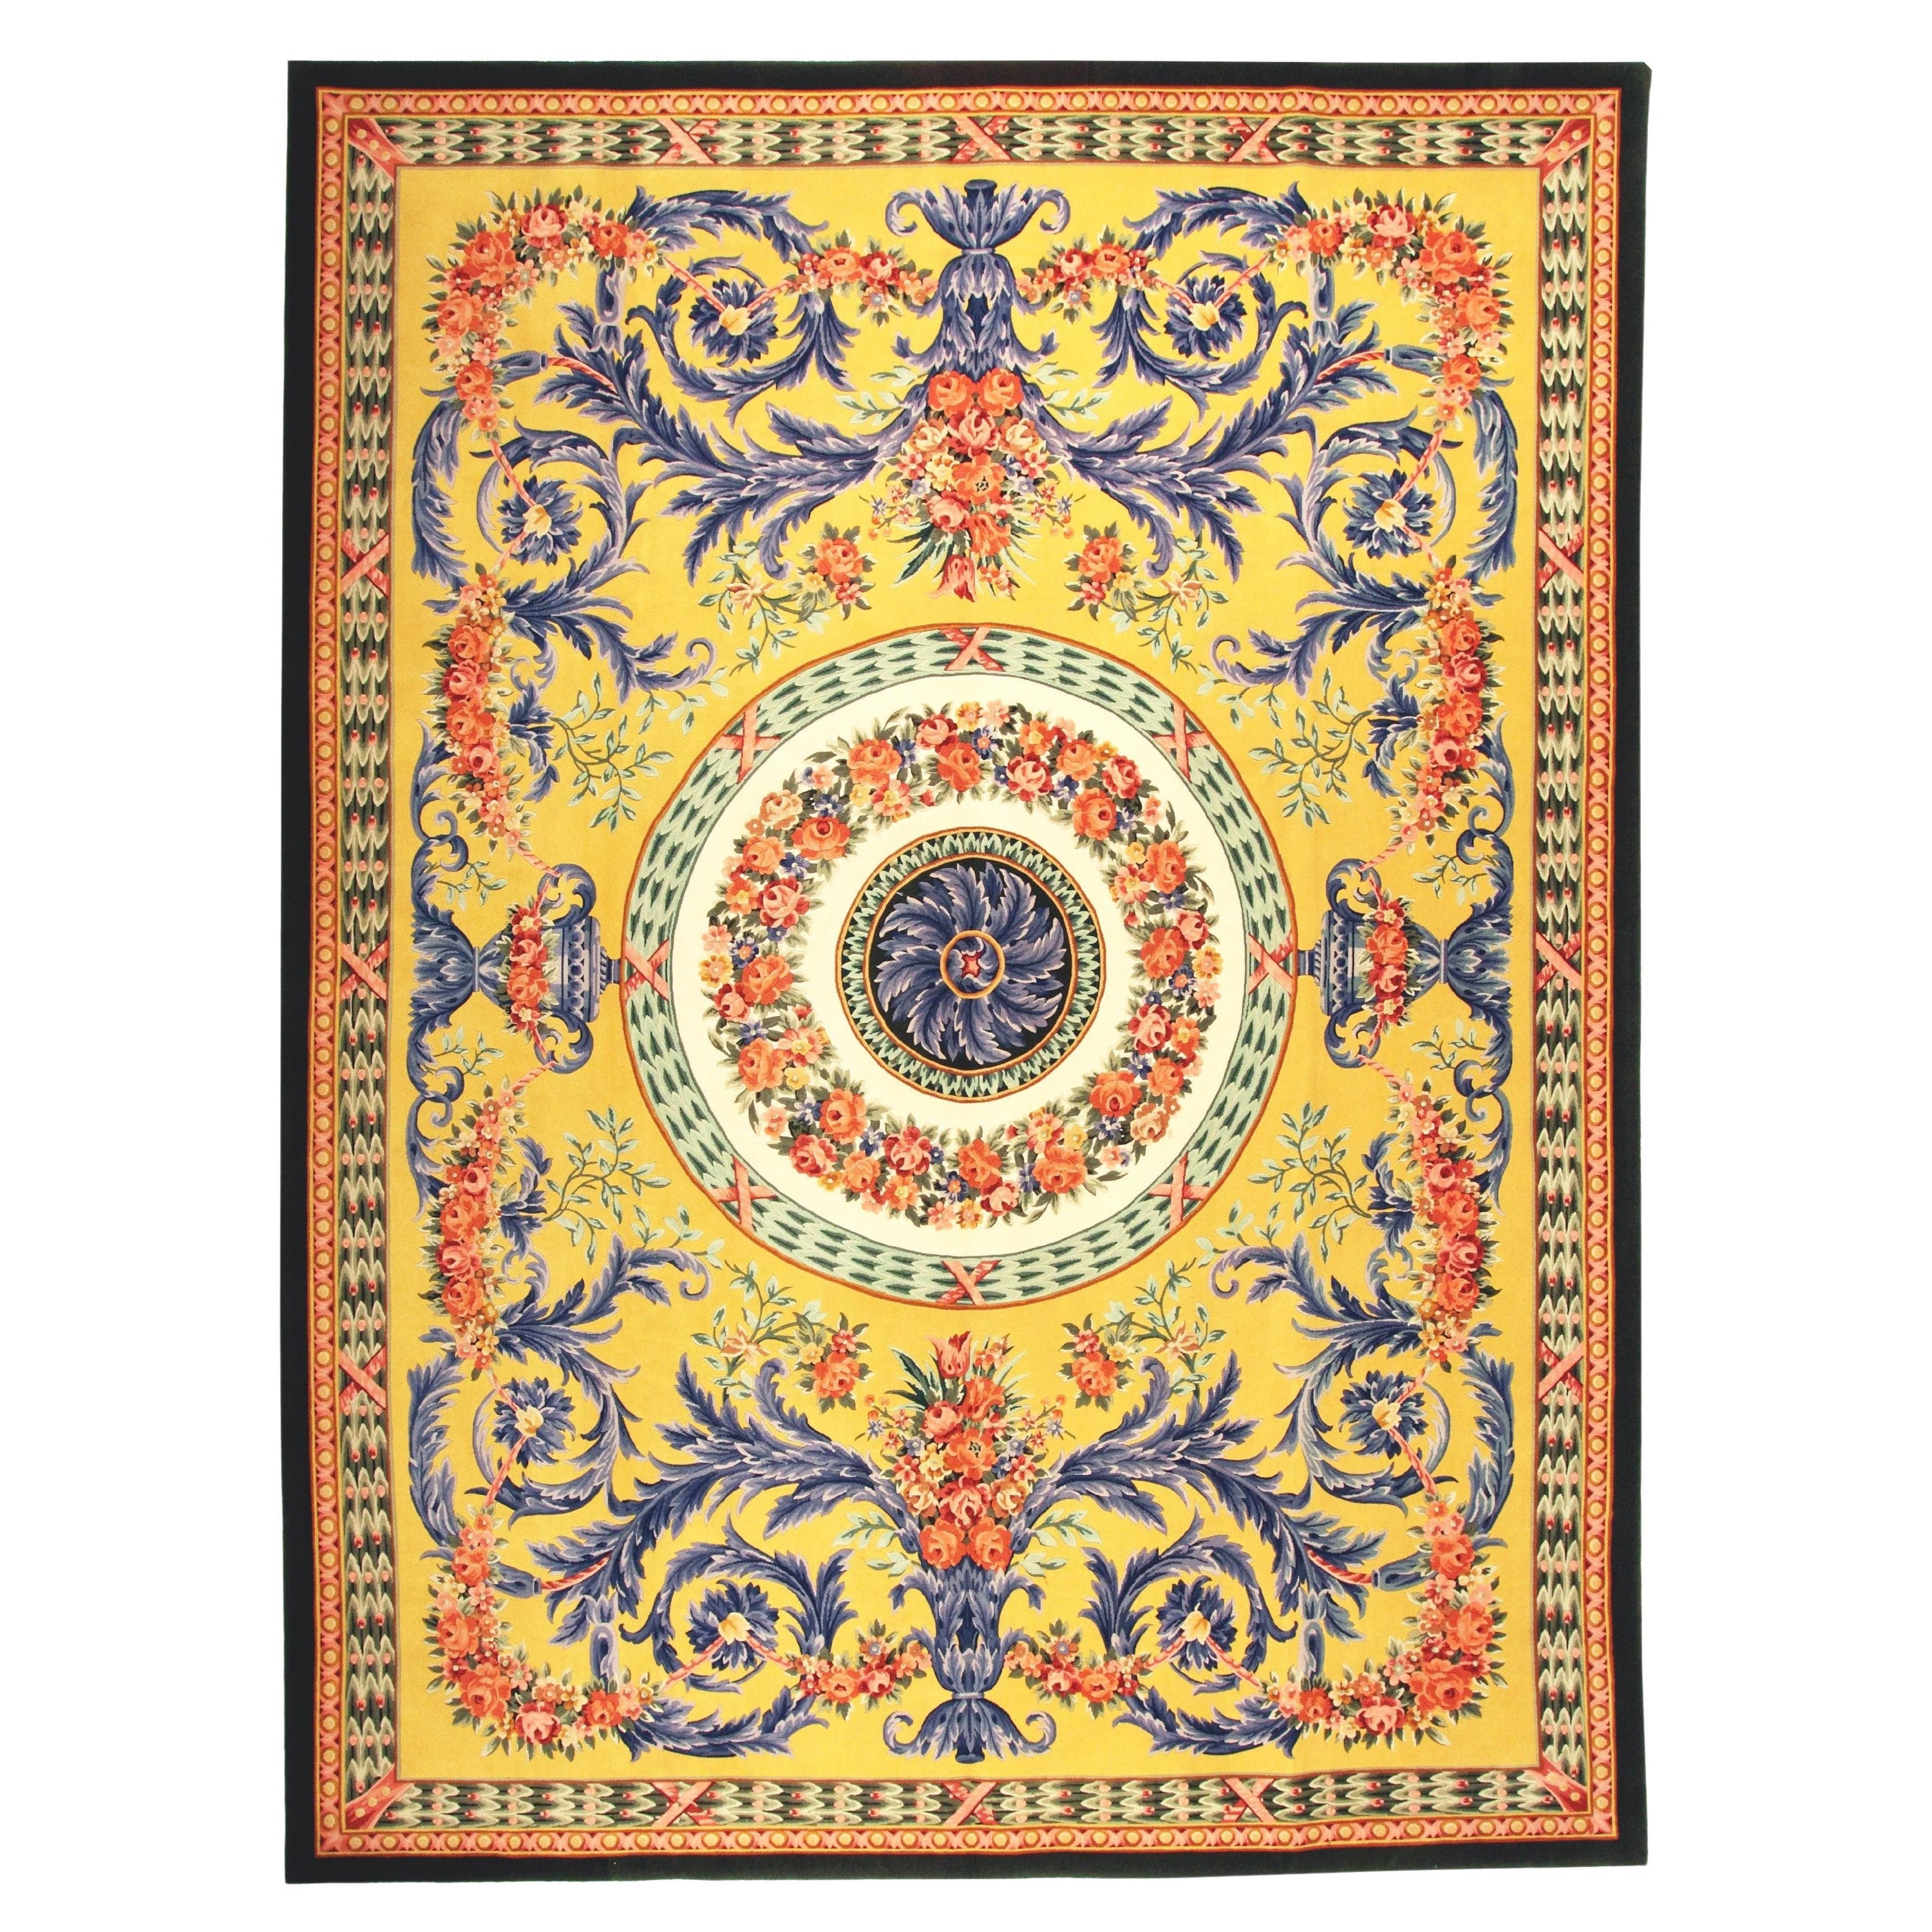 VIA COMO 'Venetian' Wool & Silk Hand Knotted Rug Carpet 10x13 ft One of a Kind  For Sale